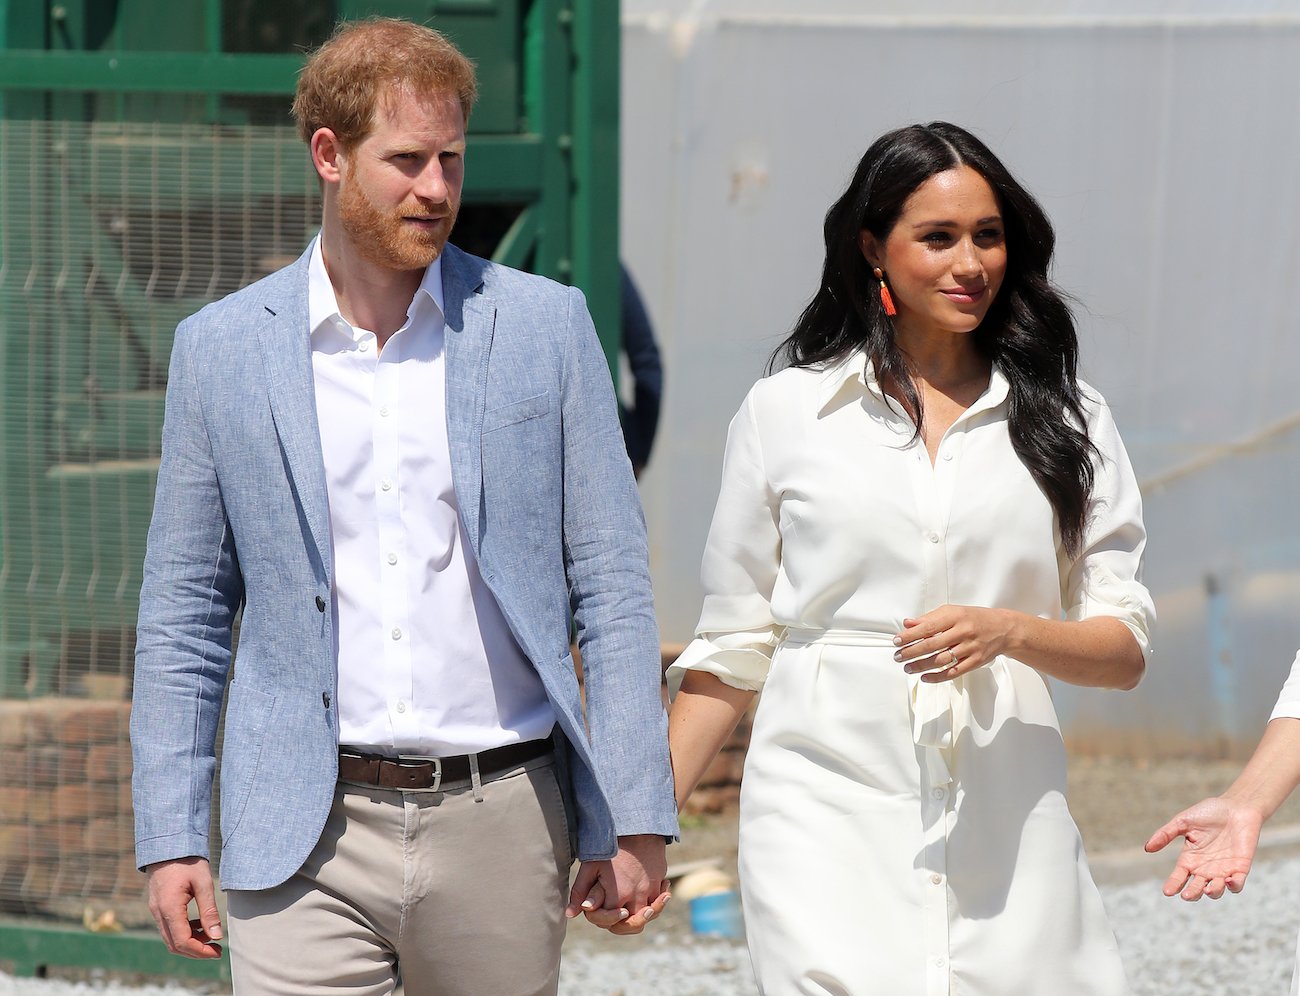 Prince Harry and Meghan Markle walking together, holding hands with Harry wearing a light blue jacket and Meghan in a white shirt dress